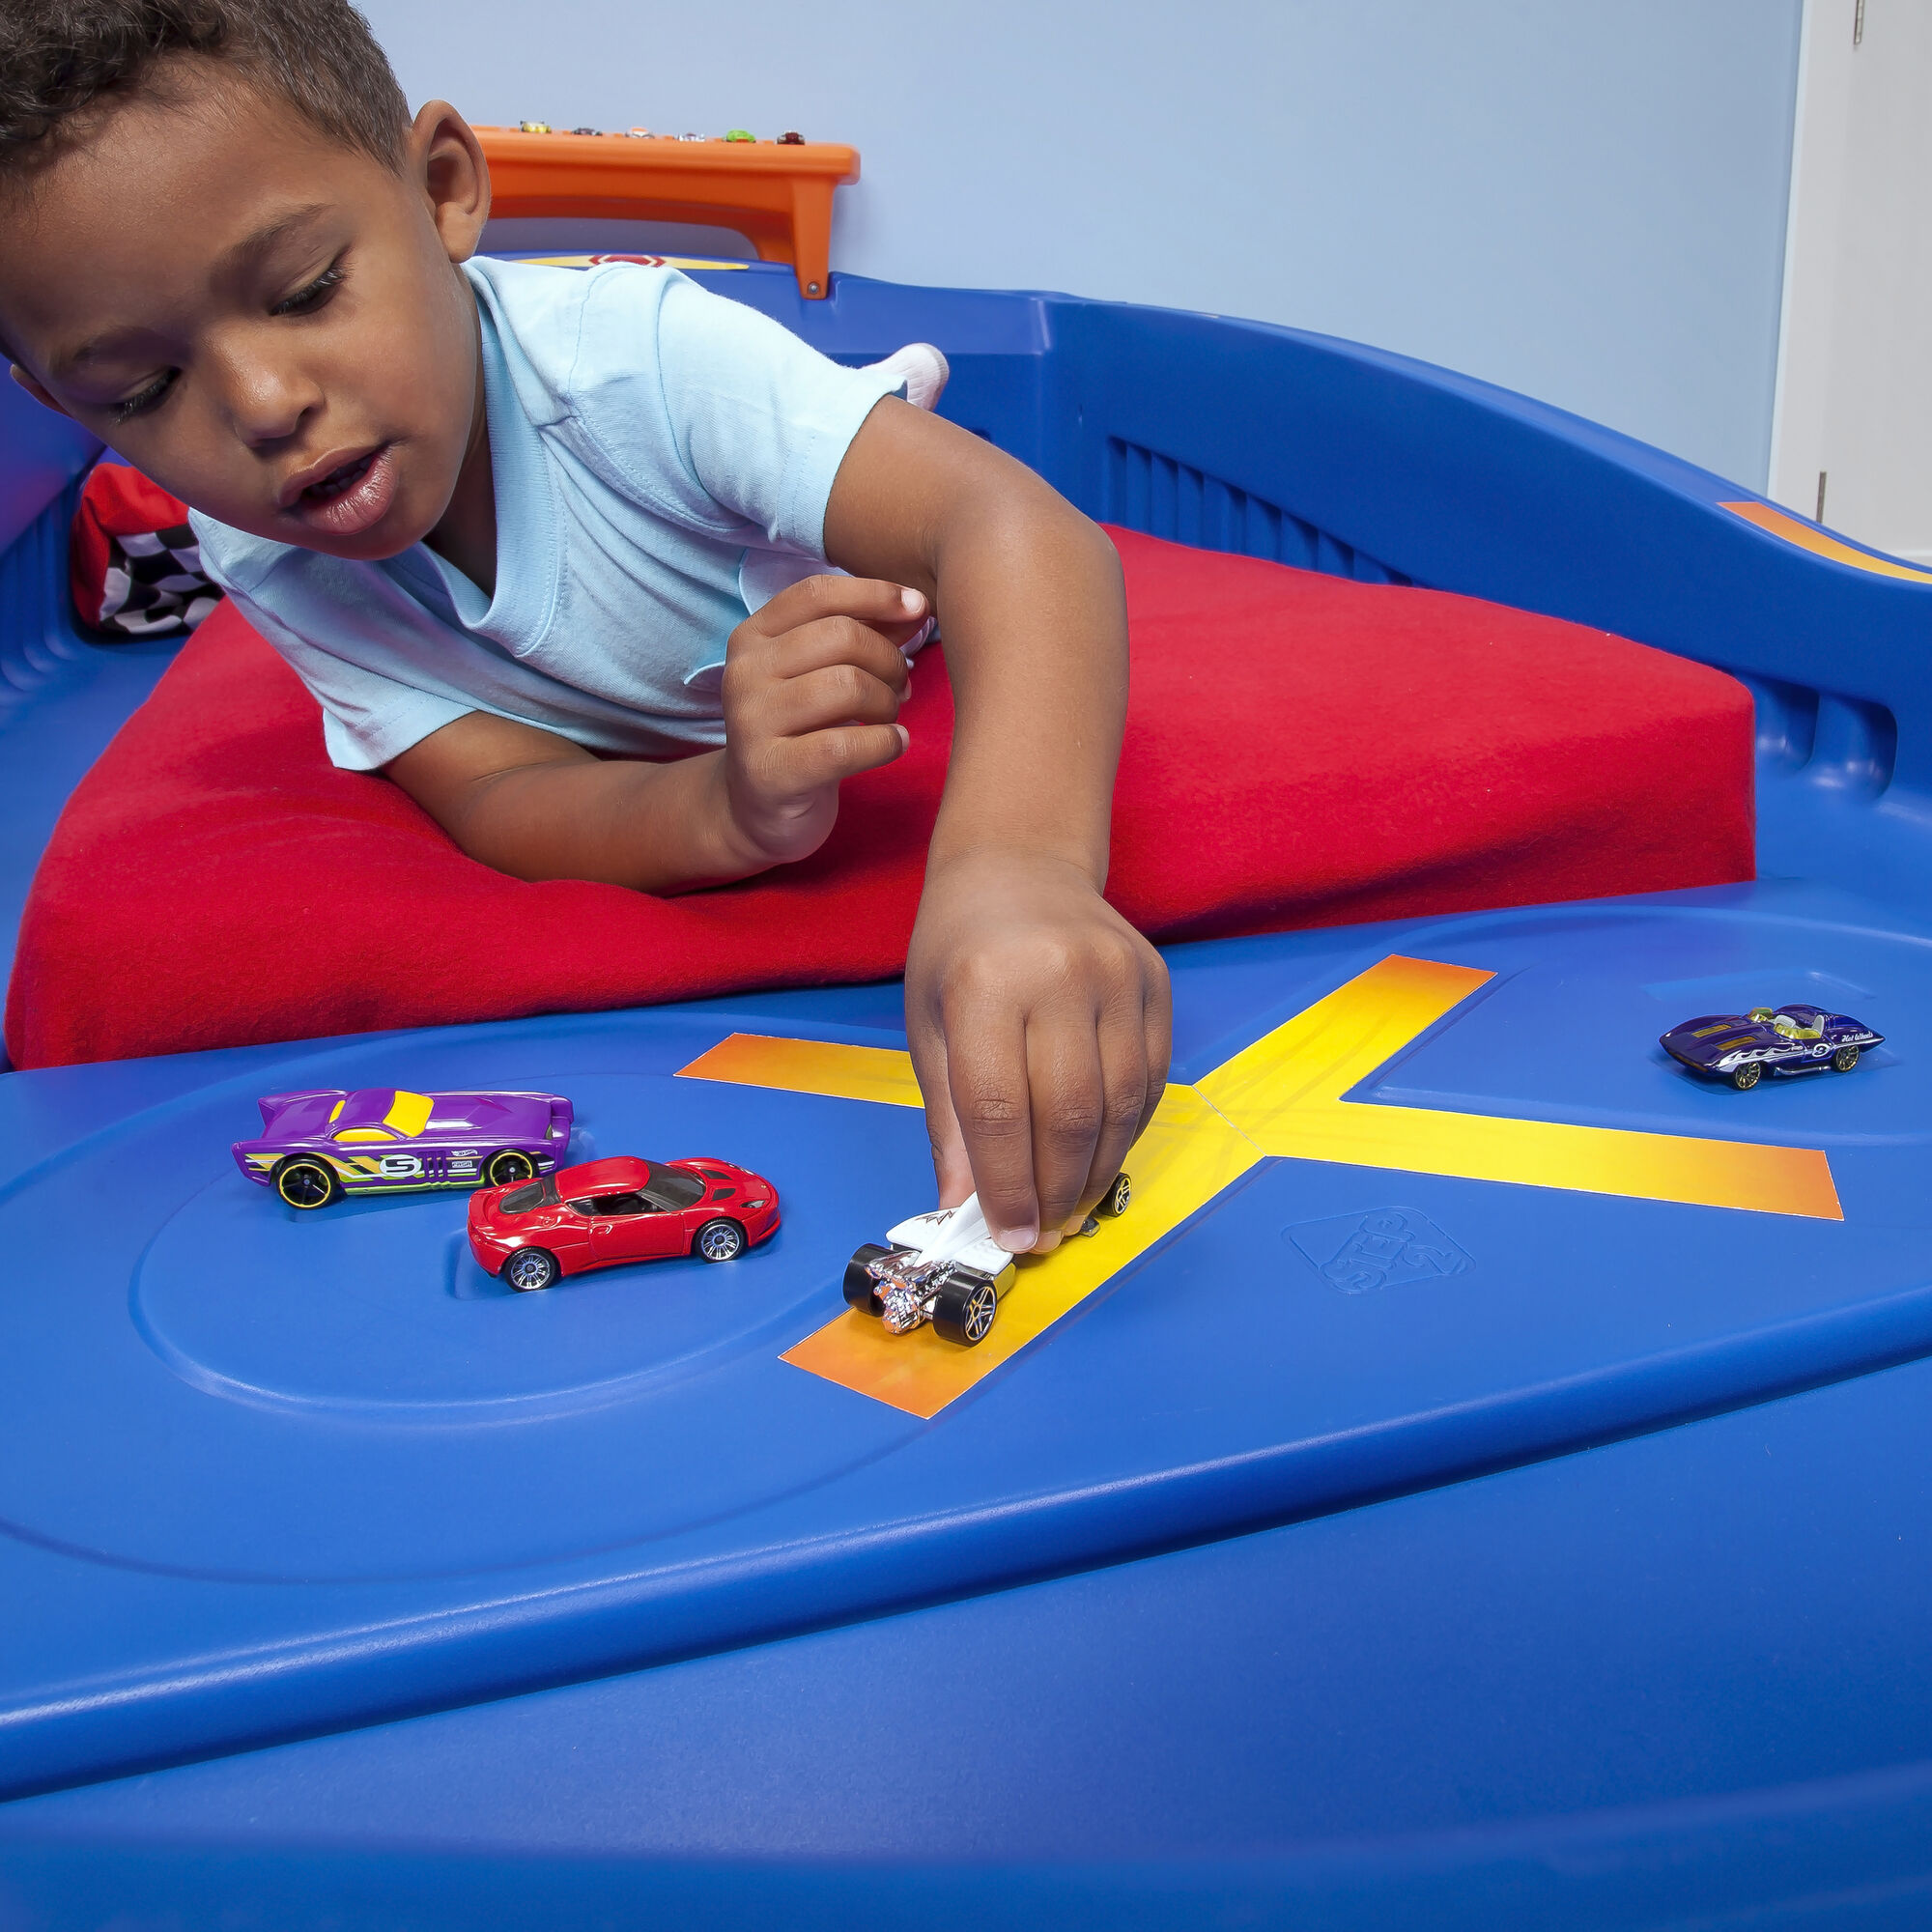 Step2 Hot Wheels Toddler-To-Twin Race Car Bed